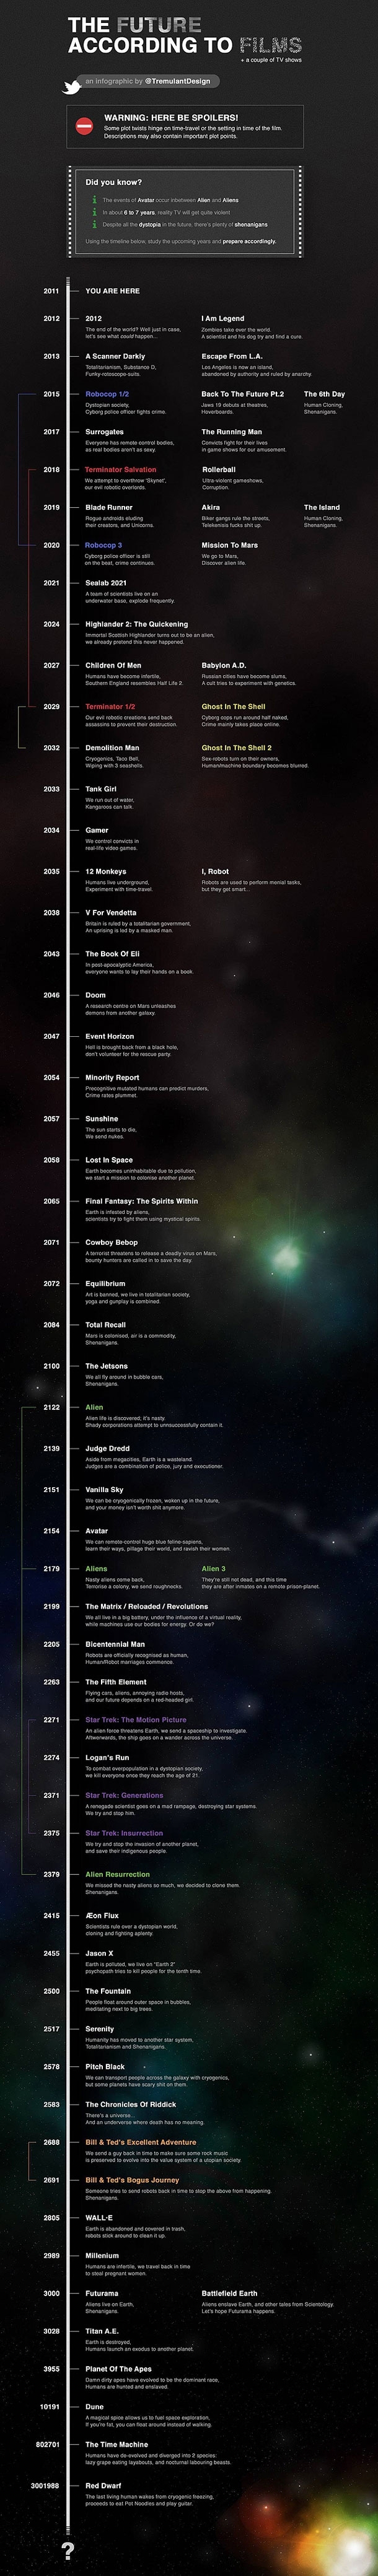 The Future According To Sci-Fi Films (INFOGRAPHIC)